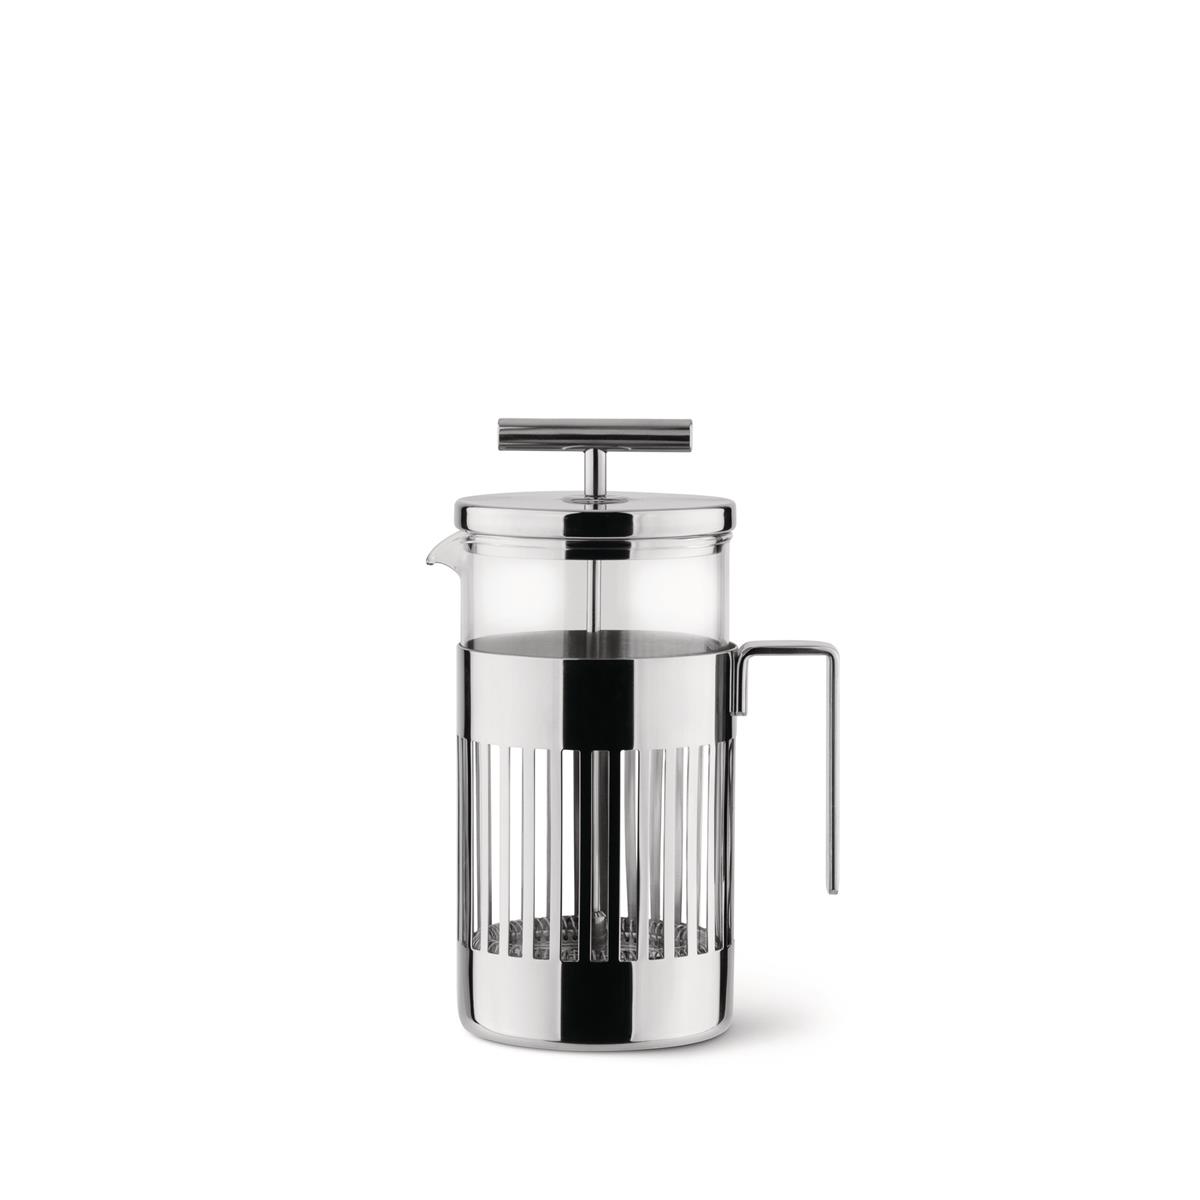 photo press filter coffee maker in 18/10 stainless steel - glass baking dish 8 cups